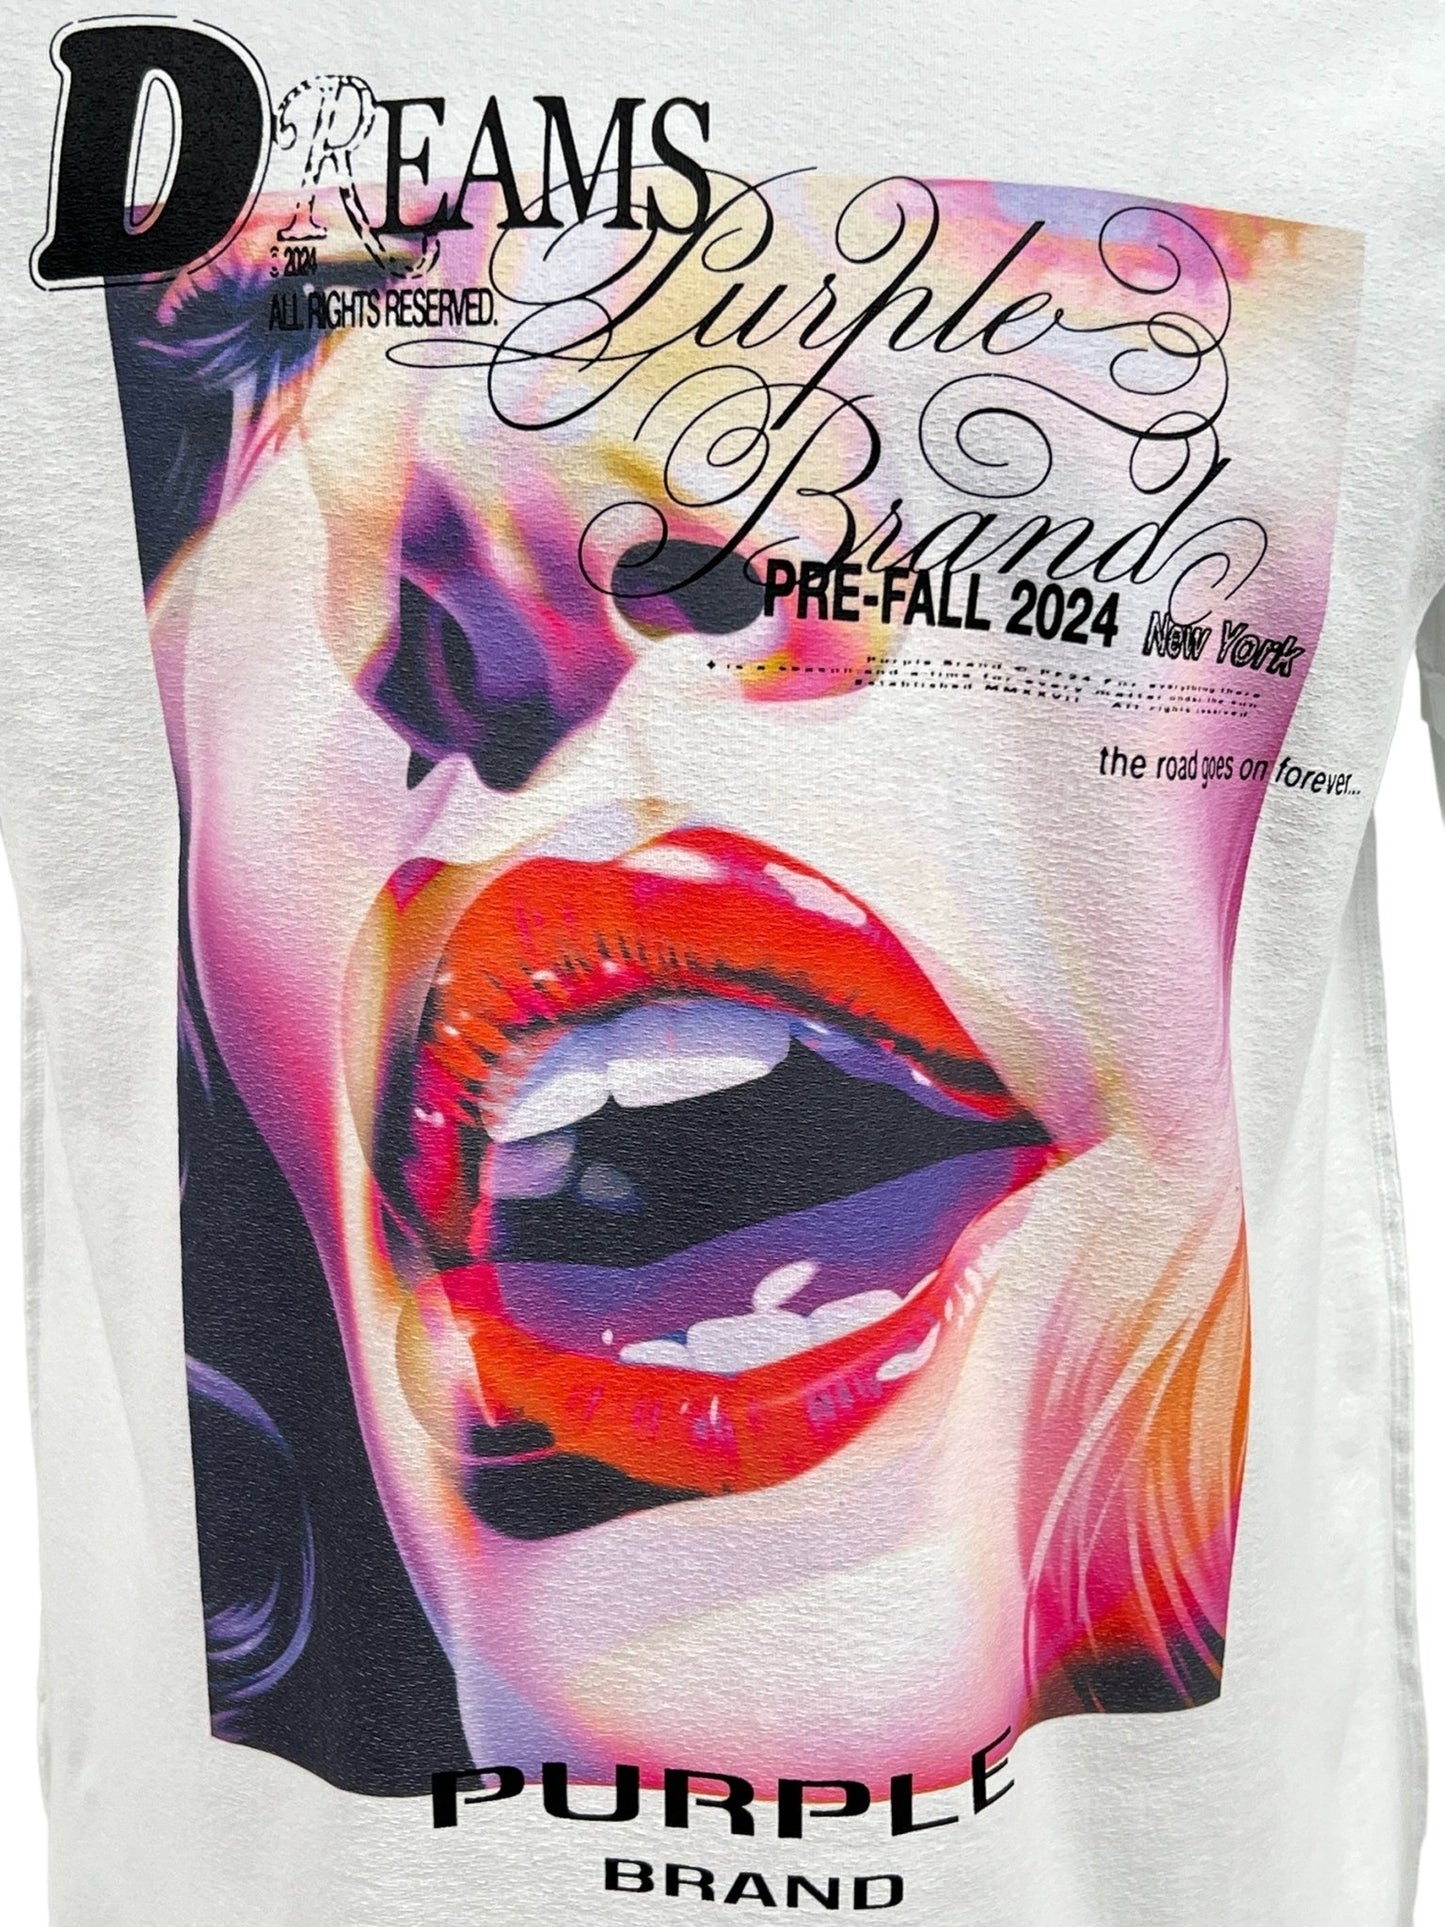 T-shirt with a colorful graphic of a woman's lips and eyes, featuring stylized PURPLE BRAND logo text "dreams purple brand pre-fall 2024 new york.